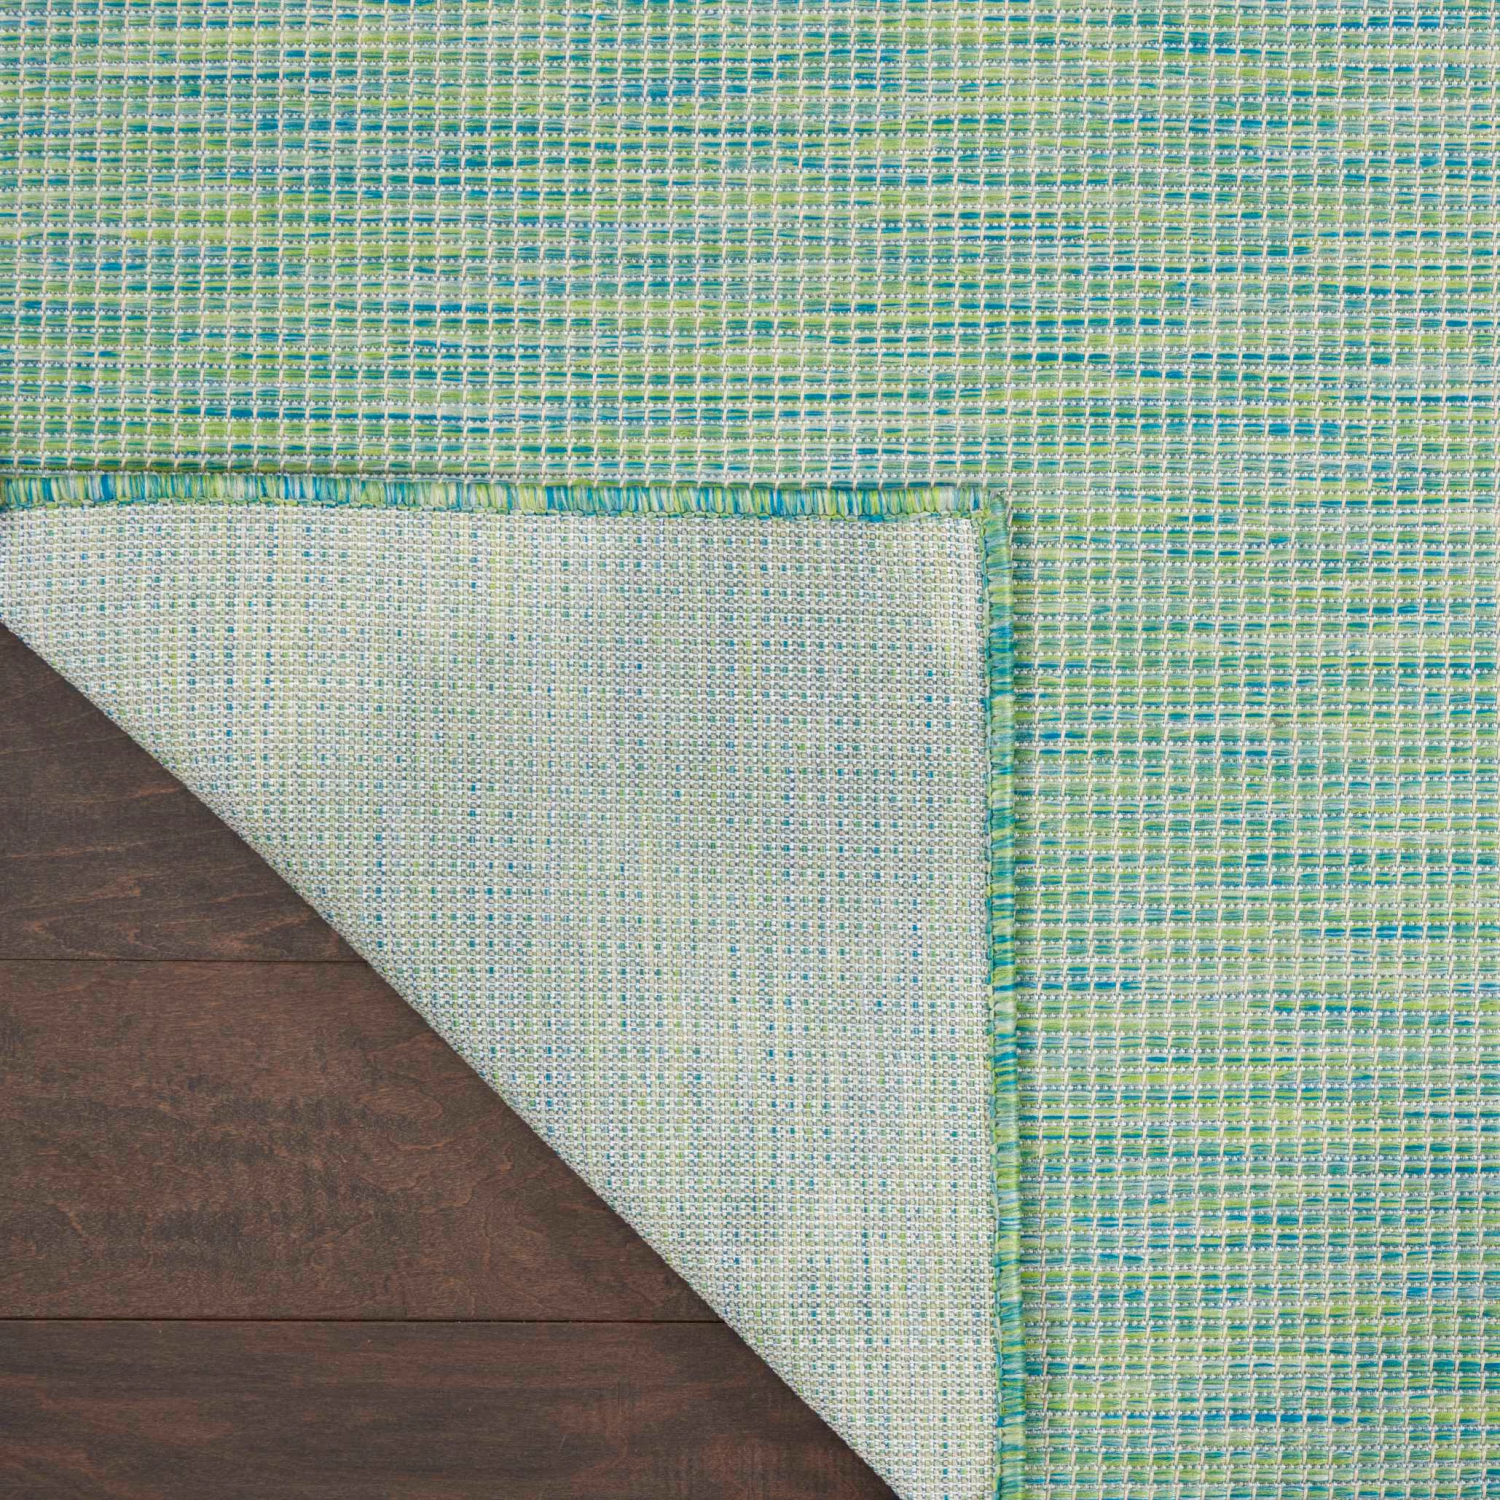 Positano Rug Blue Green 6 x 9 Close Up of Rug Backing 